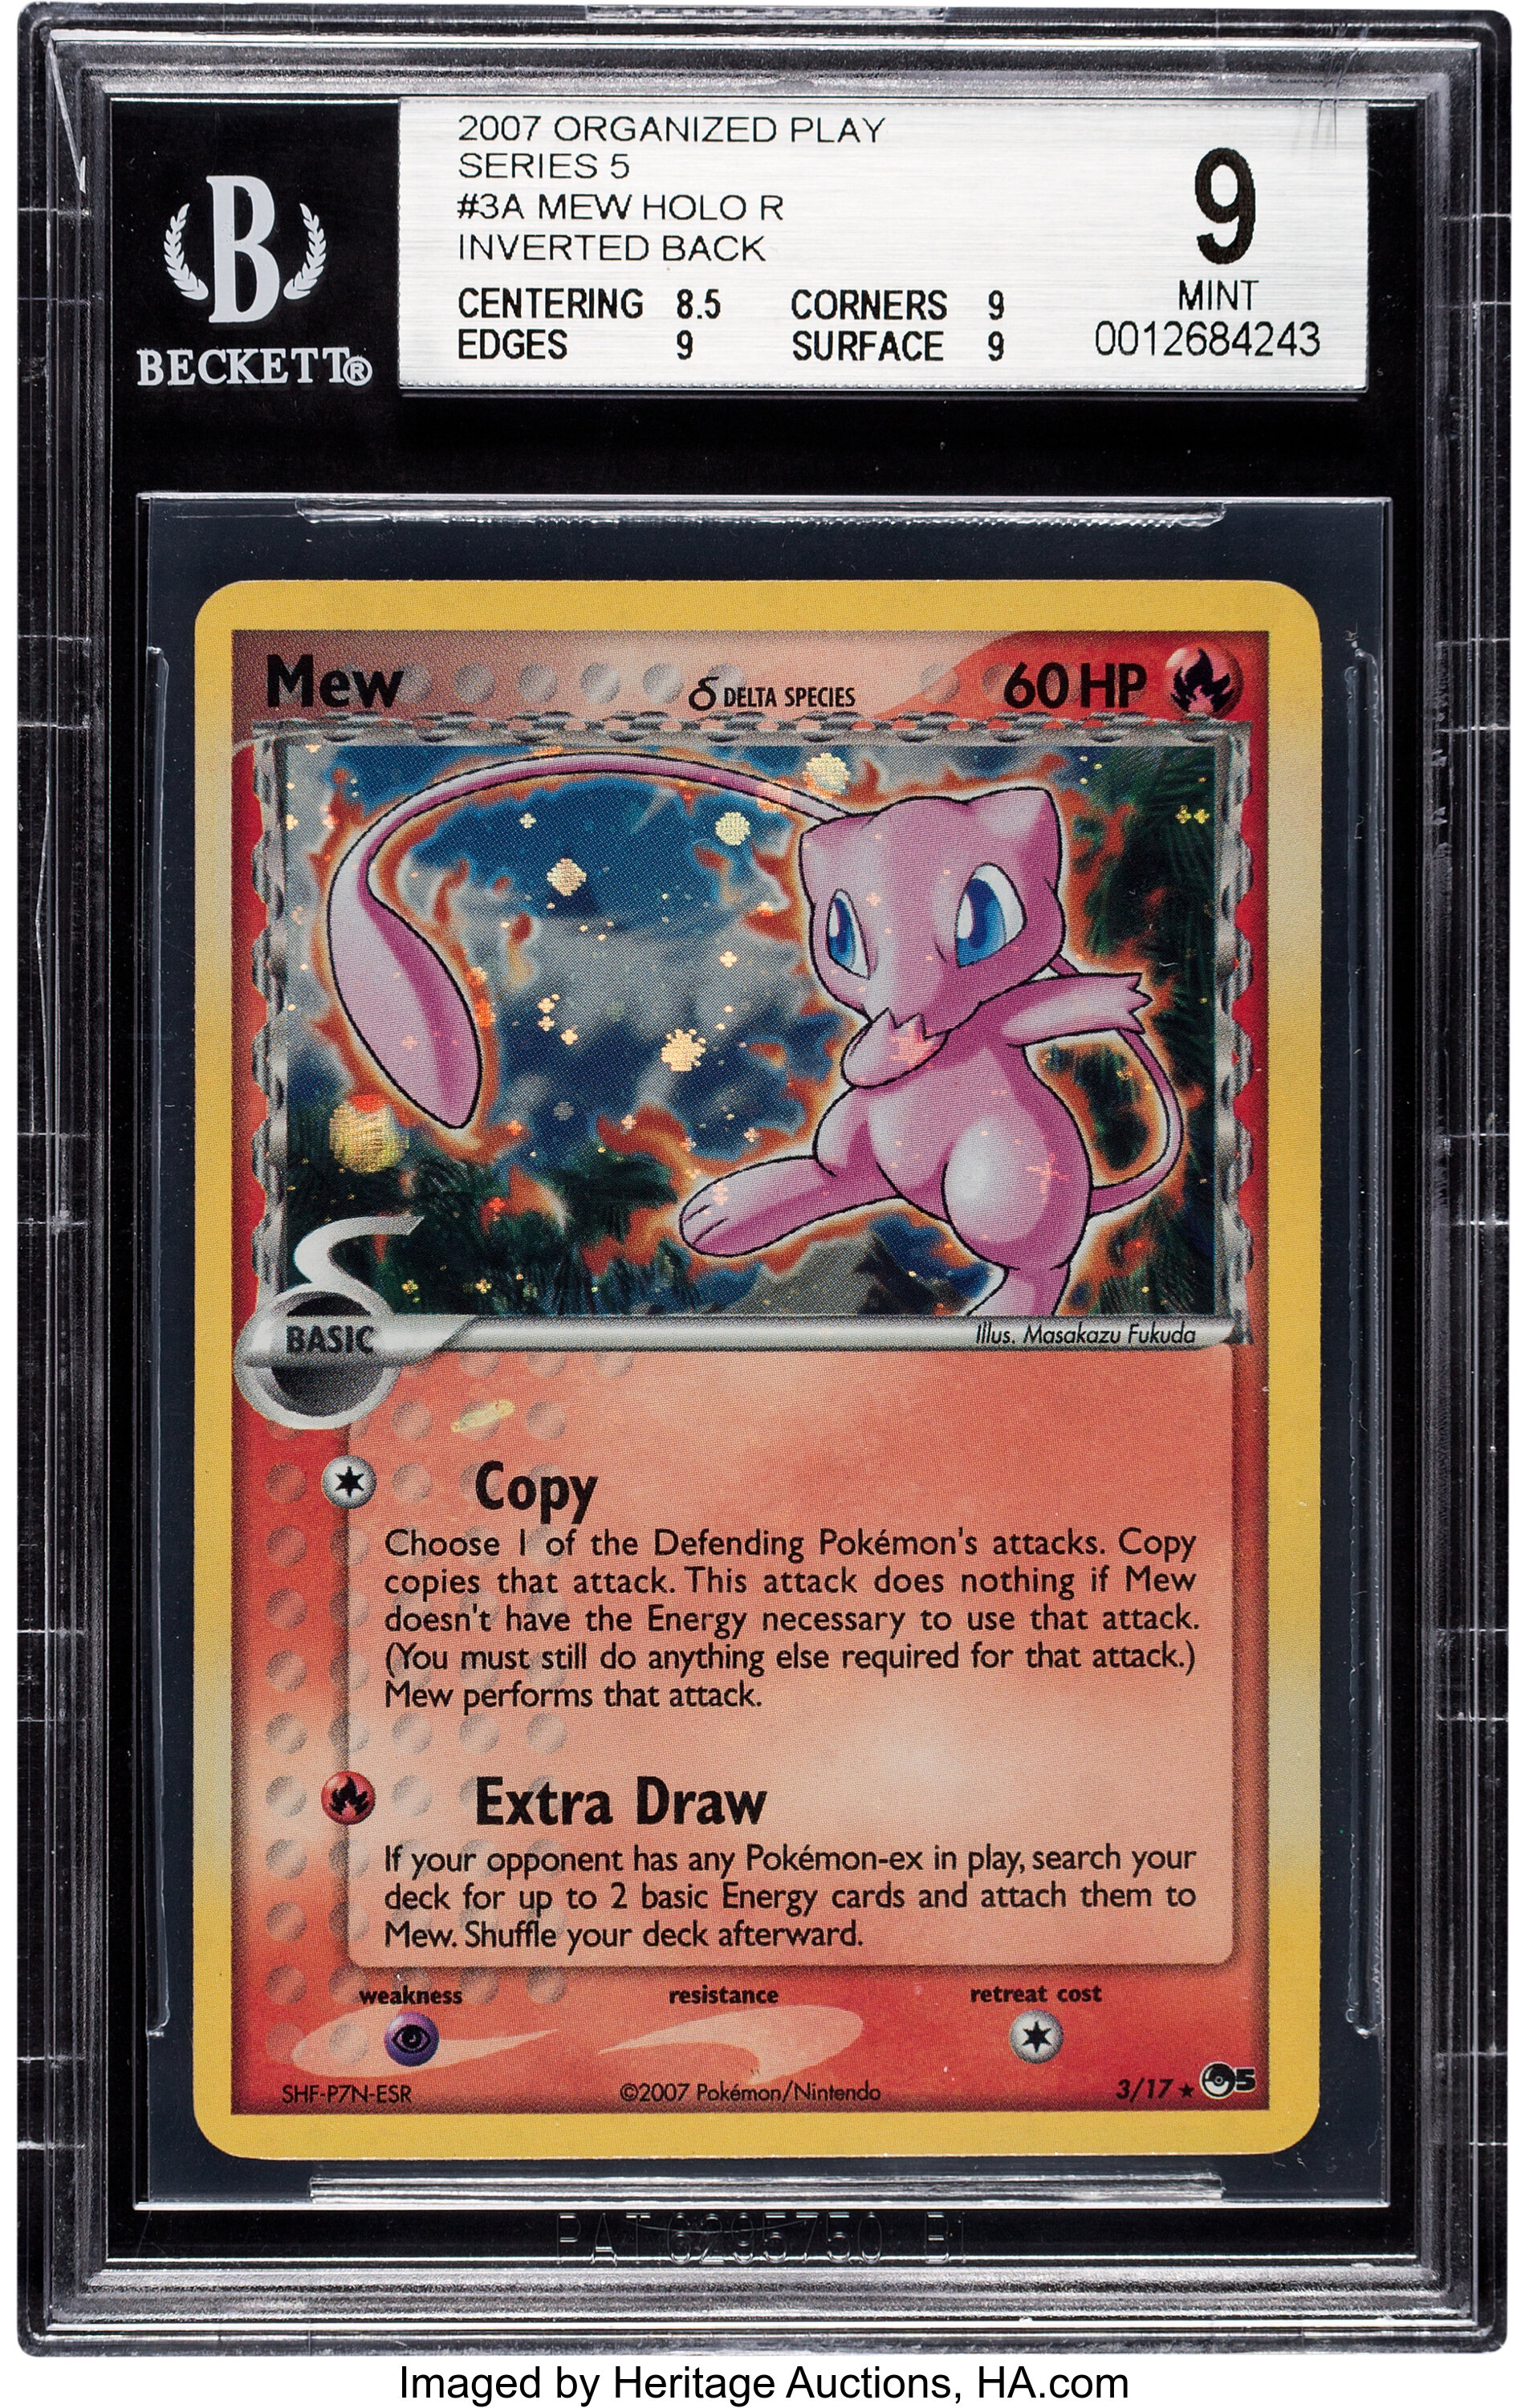 Pokemon Mew 3a Organized Play Series 5 Rare Hologram Trading Card Lot 96256 Heritage Auctions